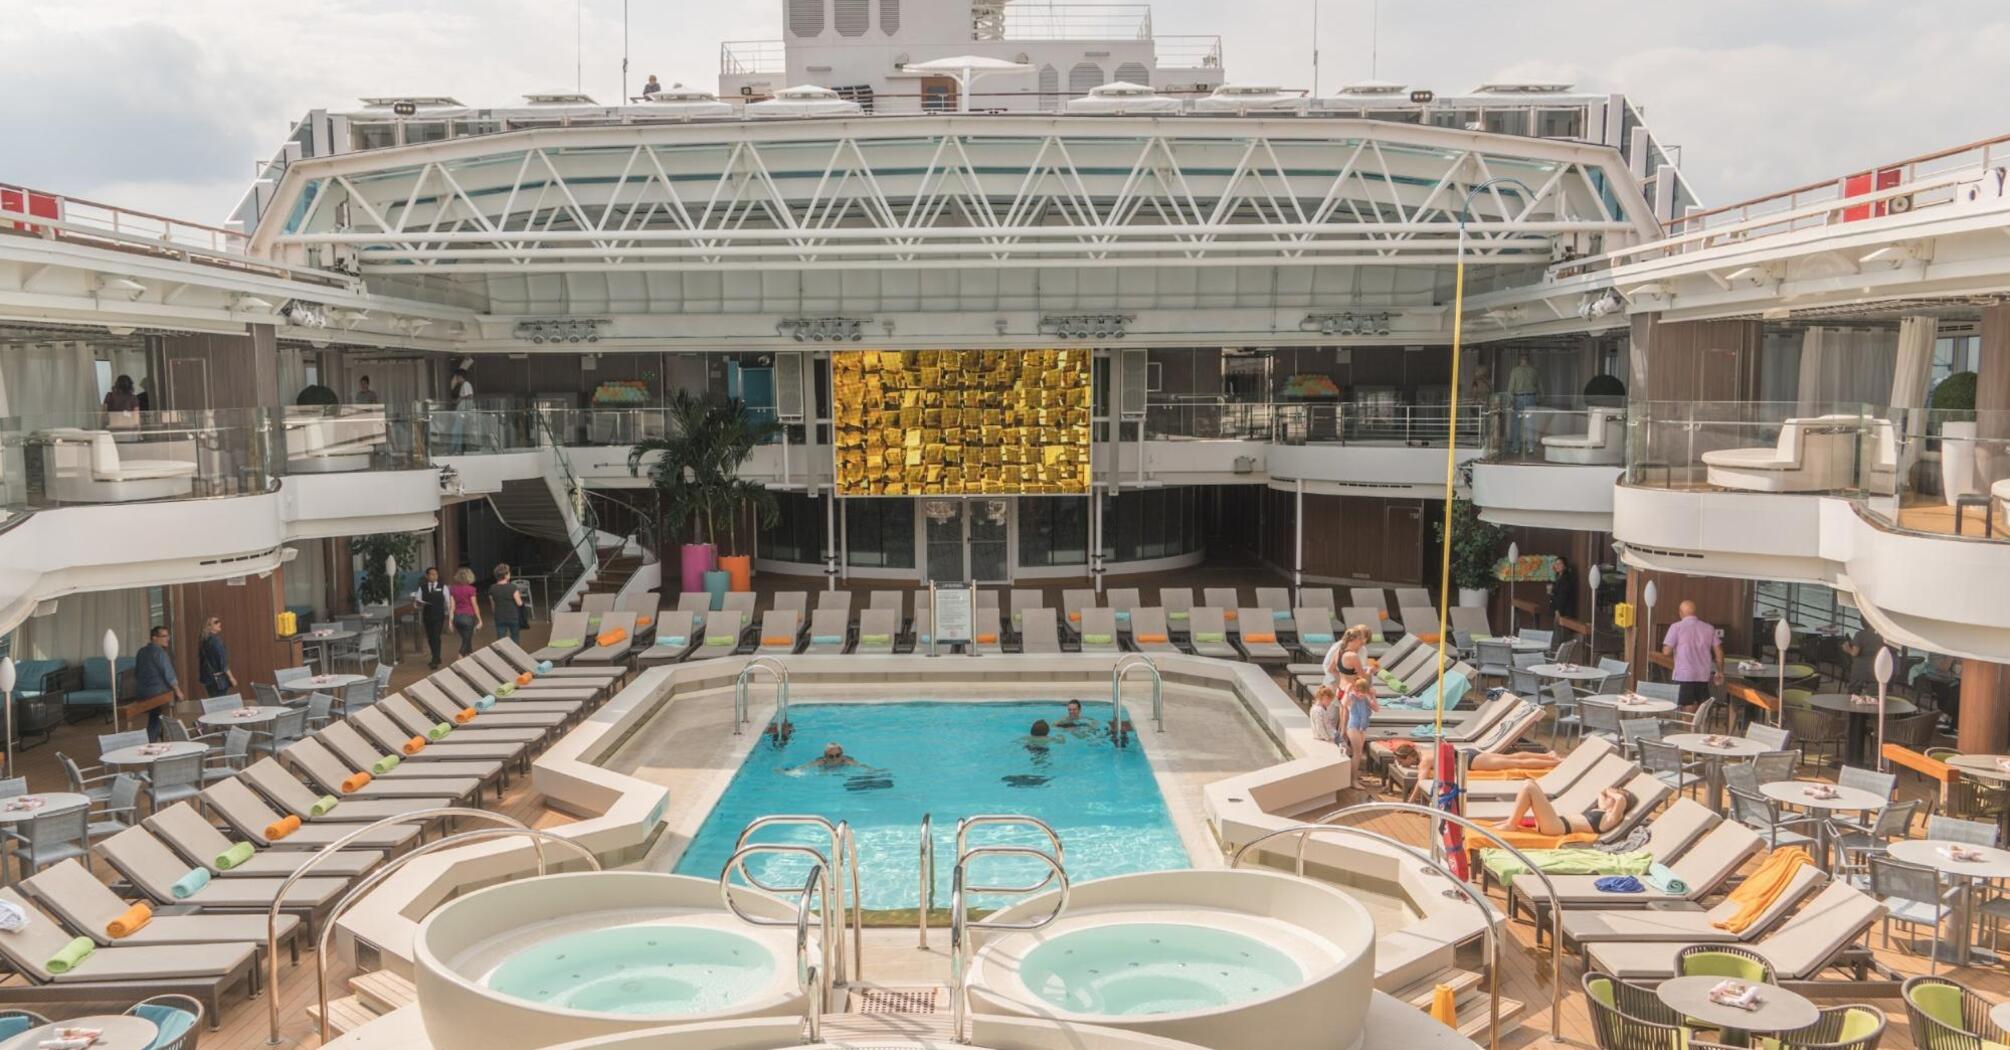 Swimming pool on the territory of a cruise ship surrounded by sun loungers